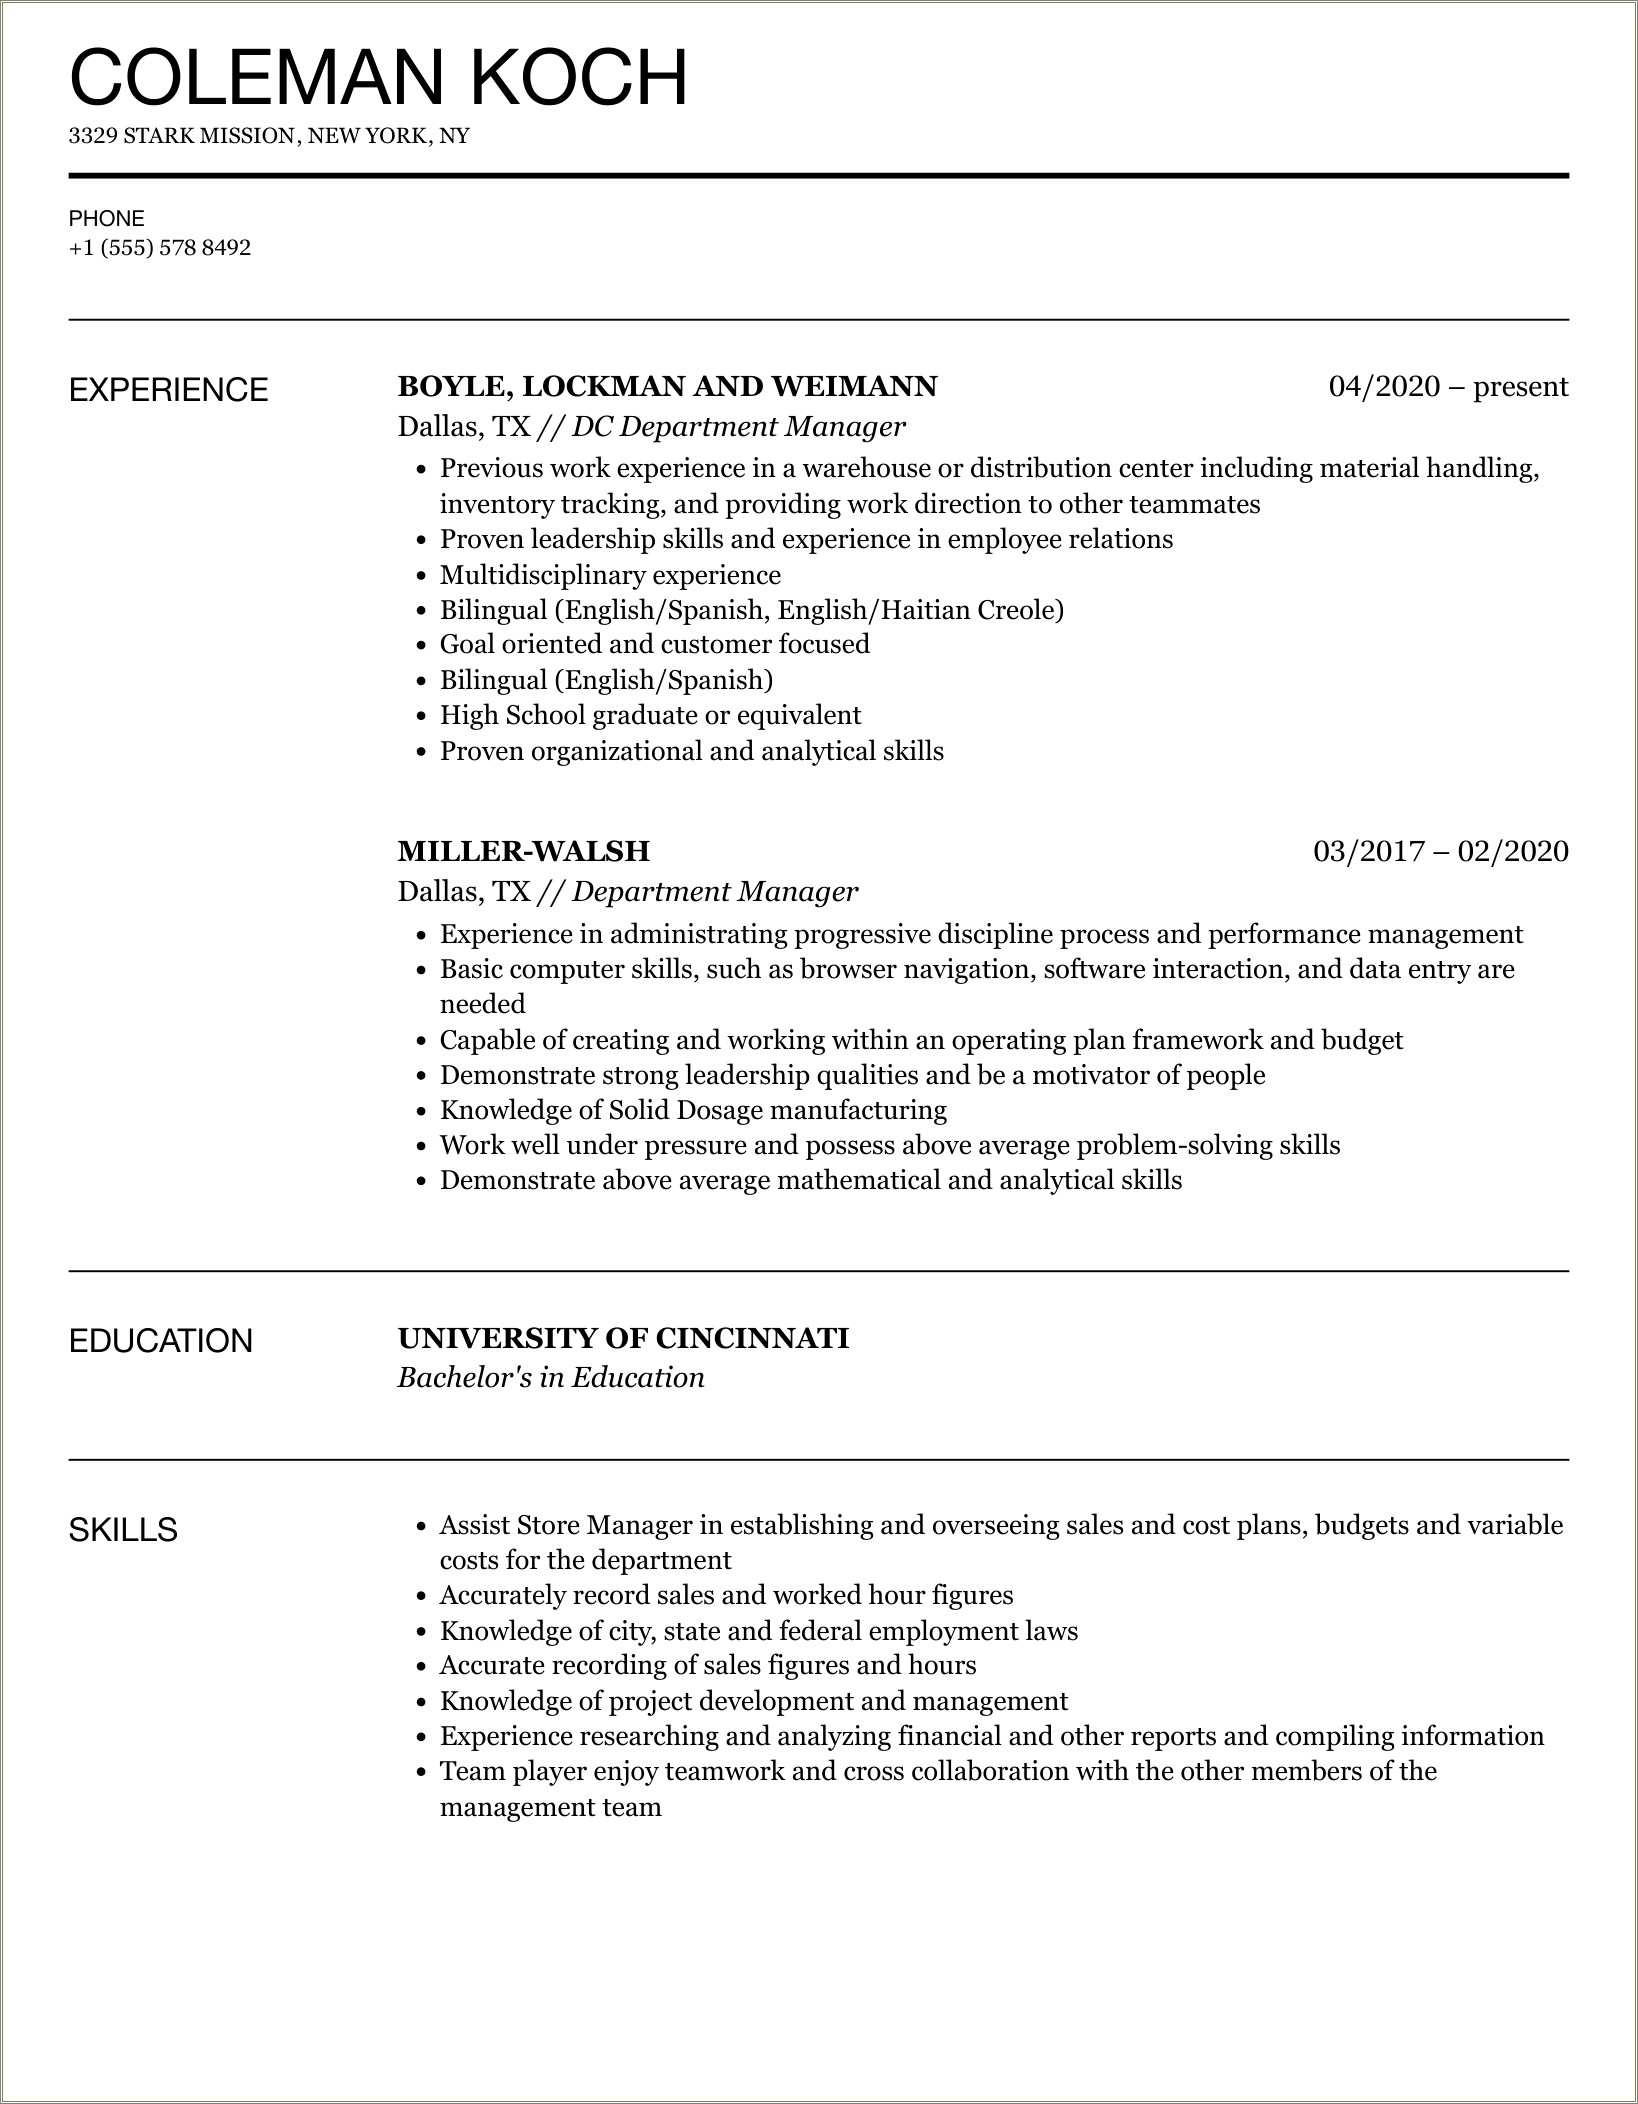 Resume Format For Department Manager In Retail